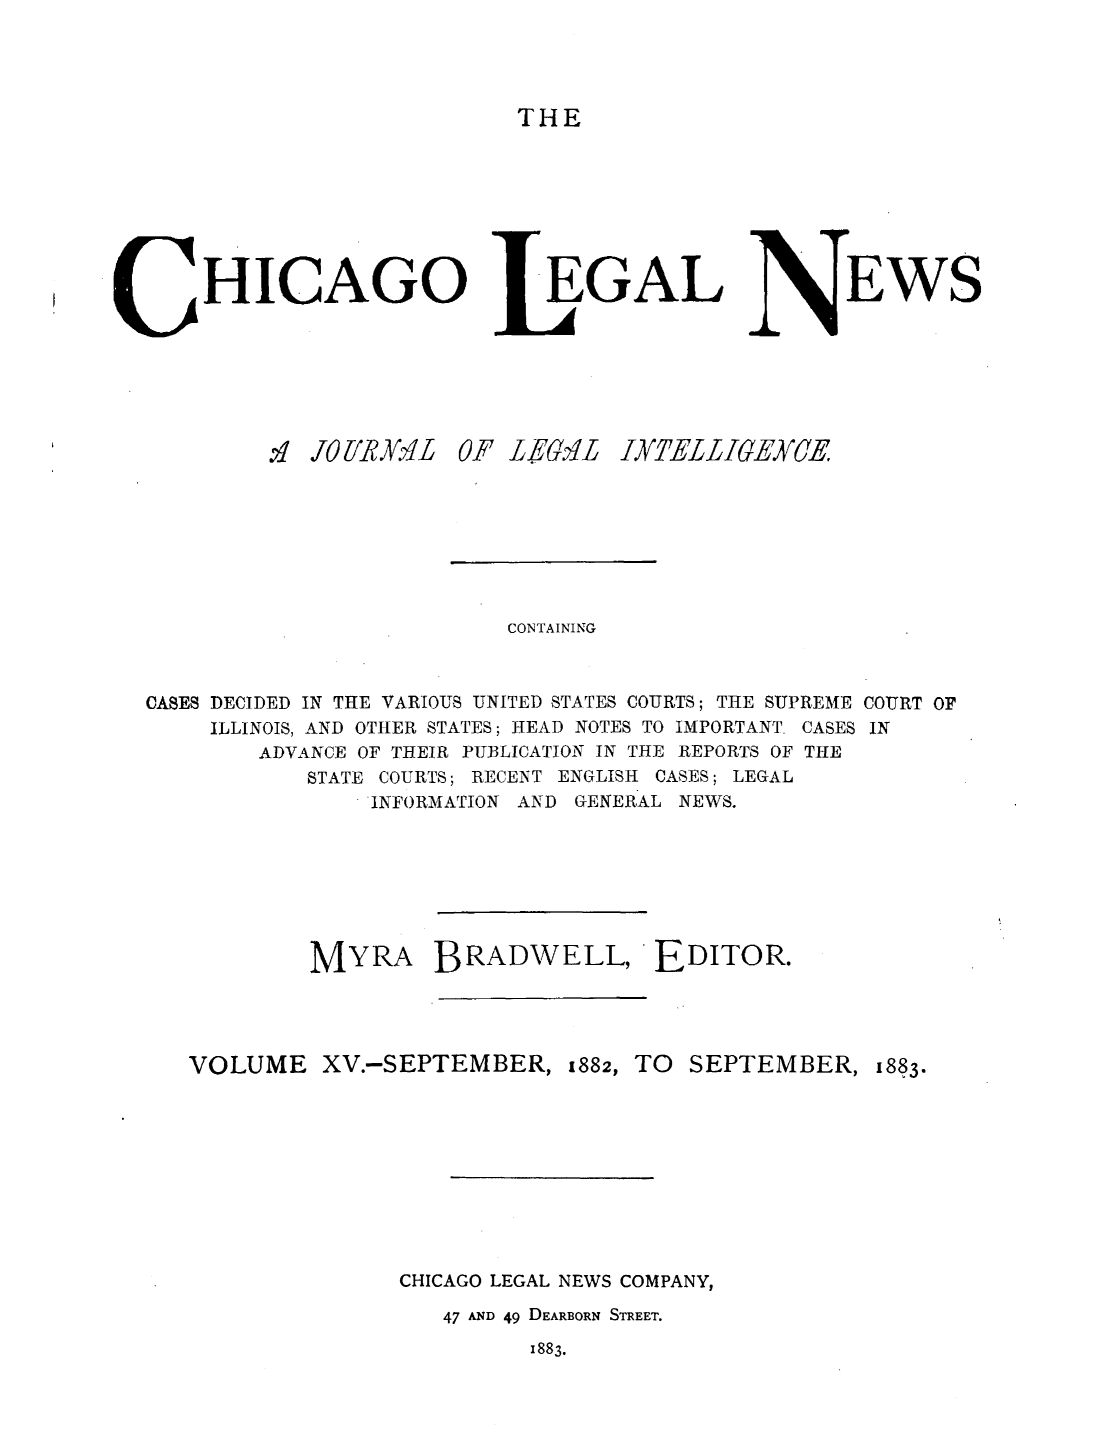 handle is hein.journals/chiclene15 and id is 1 raw text is: THEHICAGO:1 OliRAK 1  0EGAL'F L6.?LEWSCONTAININGCASES DECIDED IN THE VARIOUS UNITED STATES COURTS; THE SUPREME COURT OFILLINOIS, AND OTHER STATES; HEAD NOTES TO IMPORTANT. CASES INADVANCE OF THEIR PUBLICATION IN THE REPORTS OF THESTATE COURTS; RECENT ENGLISH CASES; LEGALINFORMATION AND GENERAL NEWS.MYRA BRADWELL, EDITOR.VOLUME XV.-SEPTEMBER, 1882, TO SEPTEMBER, 1883.CHICAGO LEGAL NEWS COMPANY,47 AND 49 DEARBORN STREET.1883.IYfELLIOEYCE